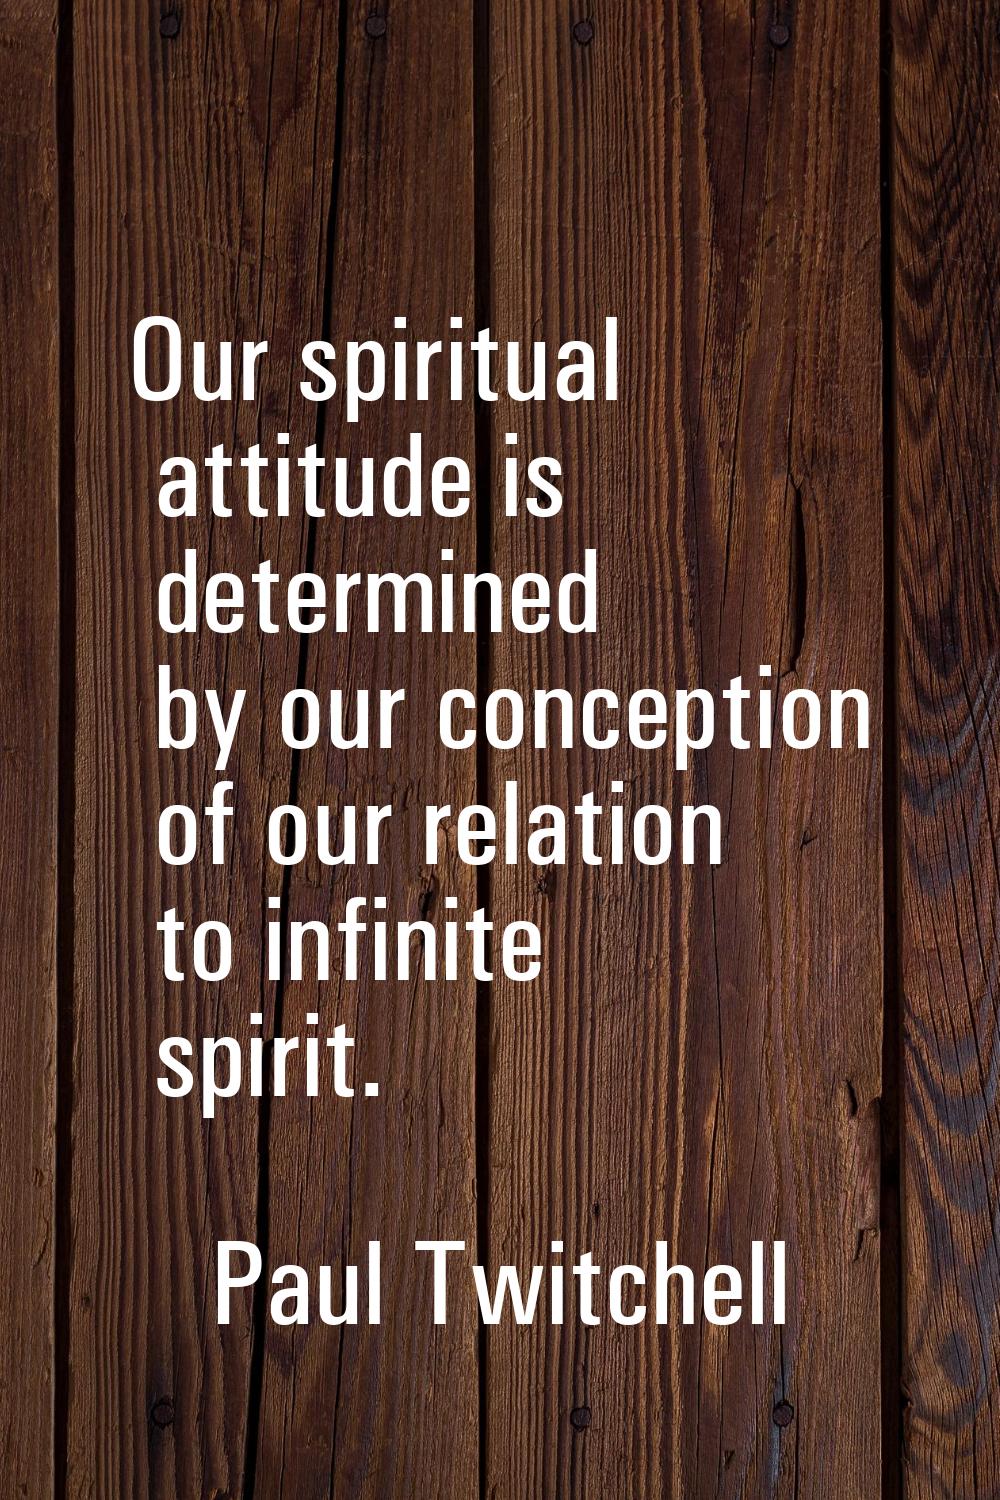 Our spiritual attitude is determined by our conception of our relation to infinite spirit.